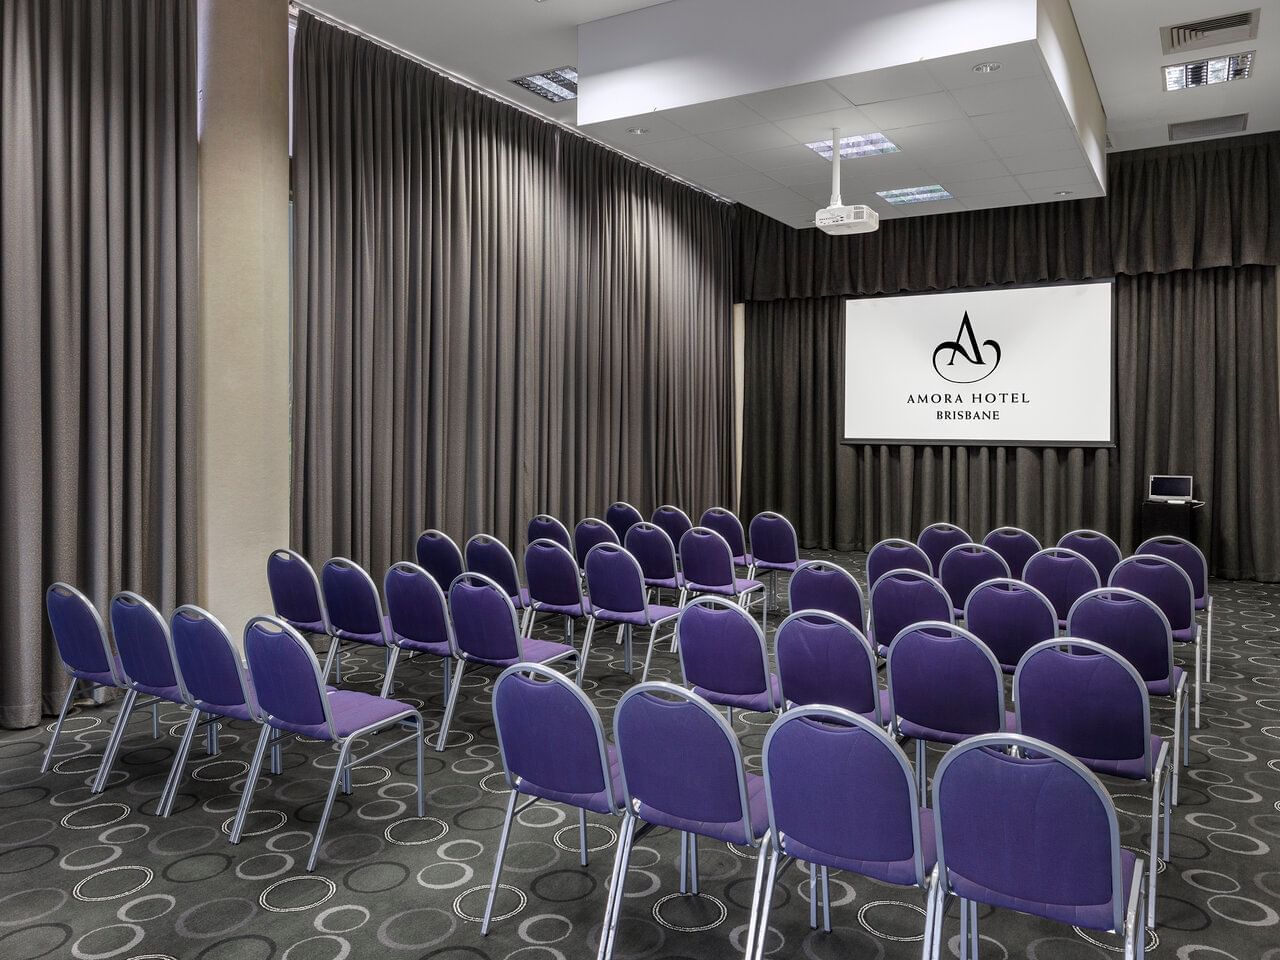 Theatre chair setup in Paterson Meeting Room at Amora Hotel